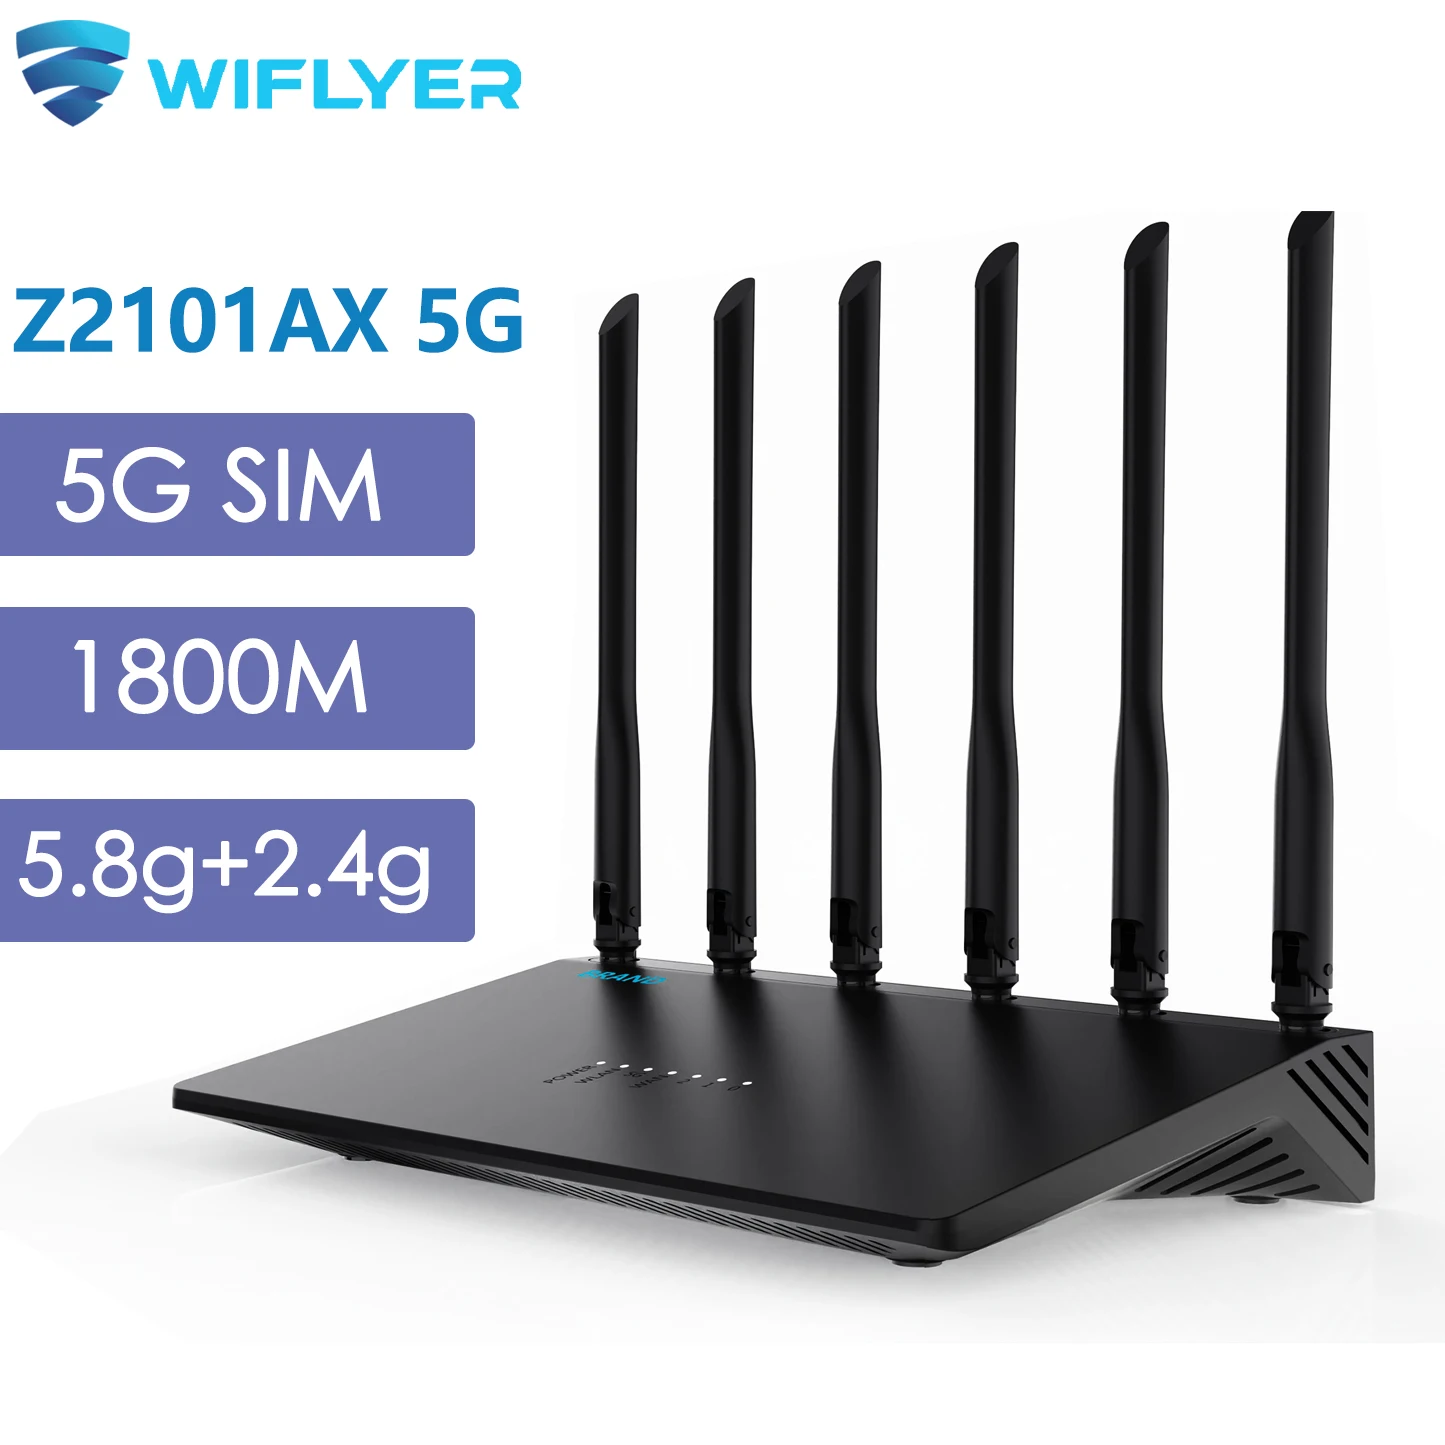 Wiflyer Openwrt 5G Router WiFi6 SIM Card 1800Mbps 128MB Flash 256MB RAM for 128 Device Mesh 5.8Ghz Wifi MI-MIMO Antenna